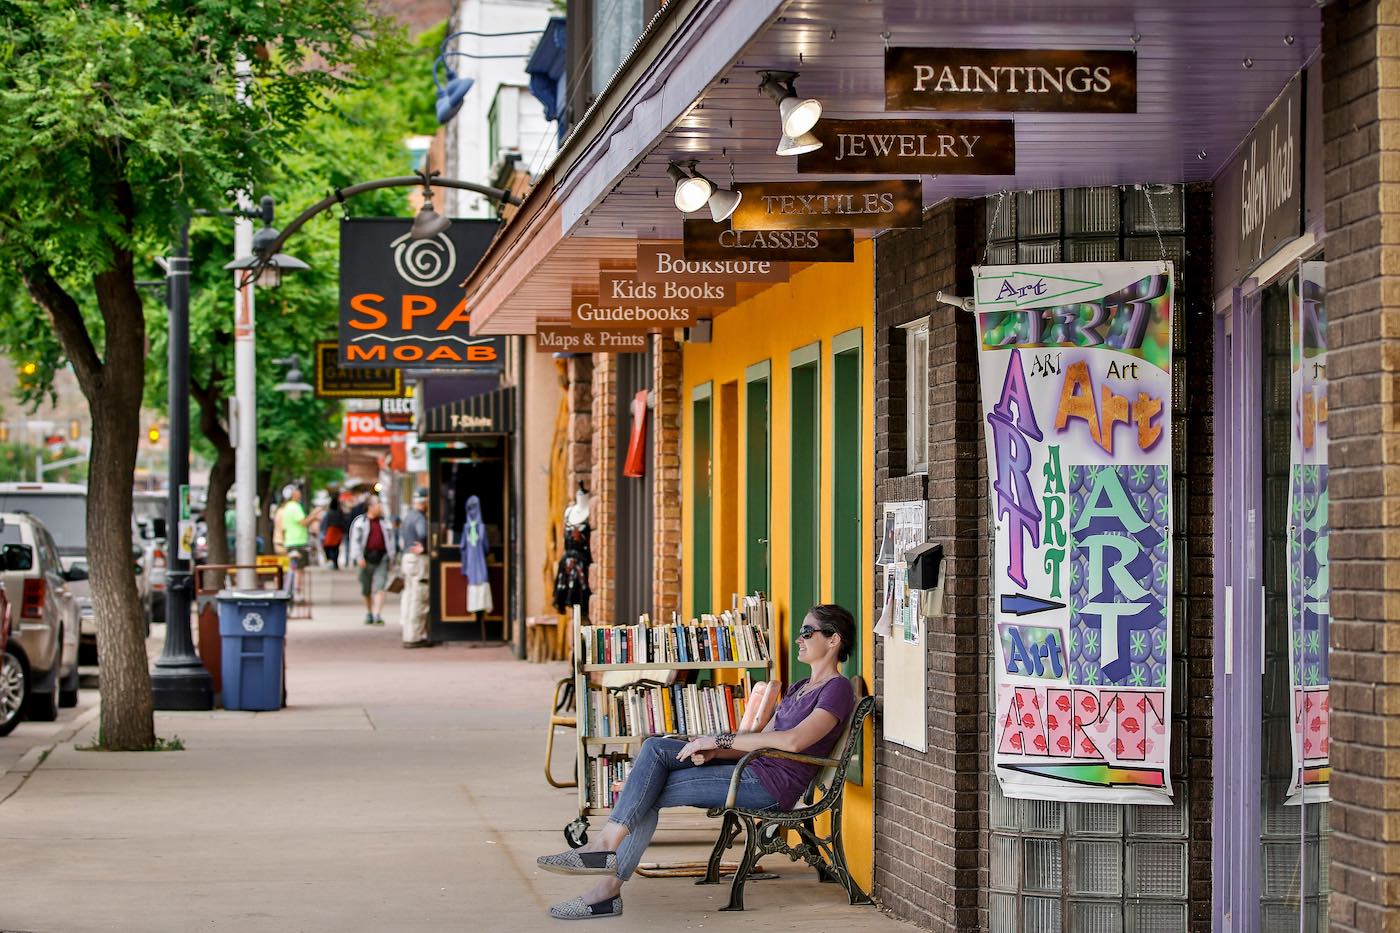 Downtown is walkable and fun to explore with quaint shops.